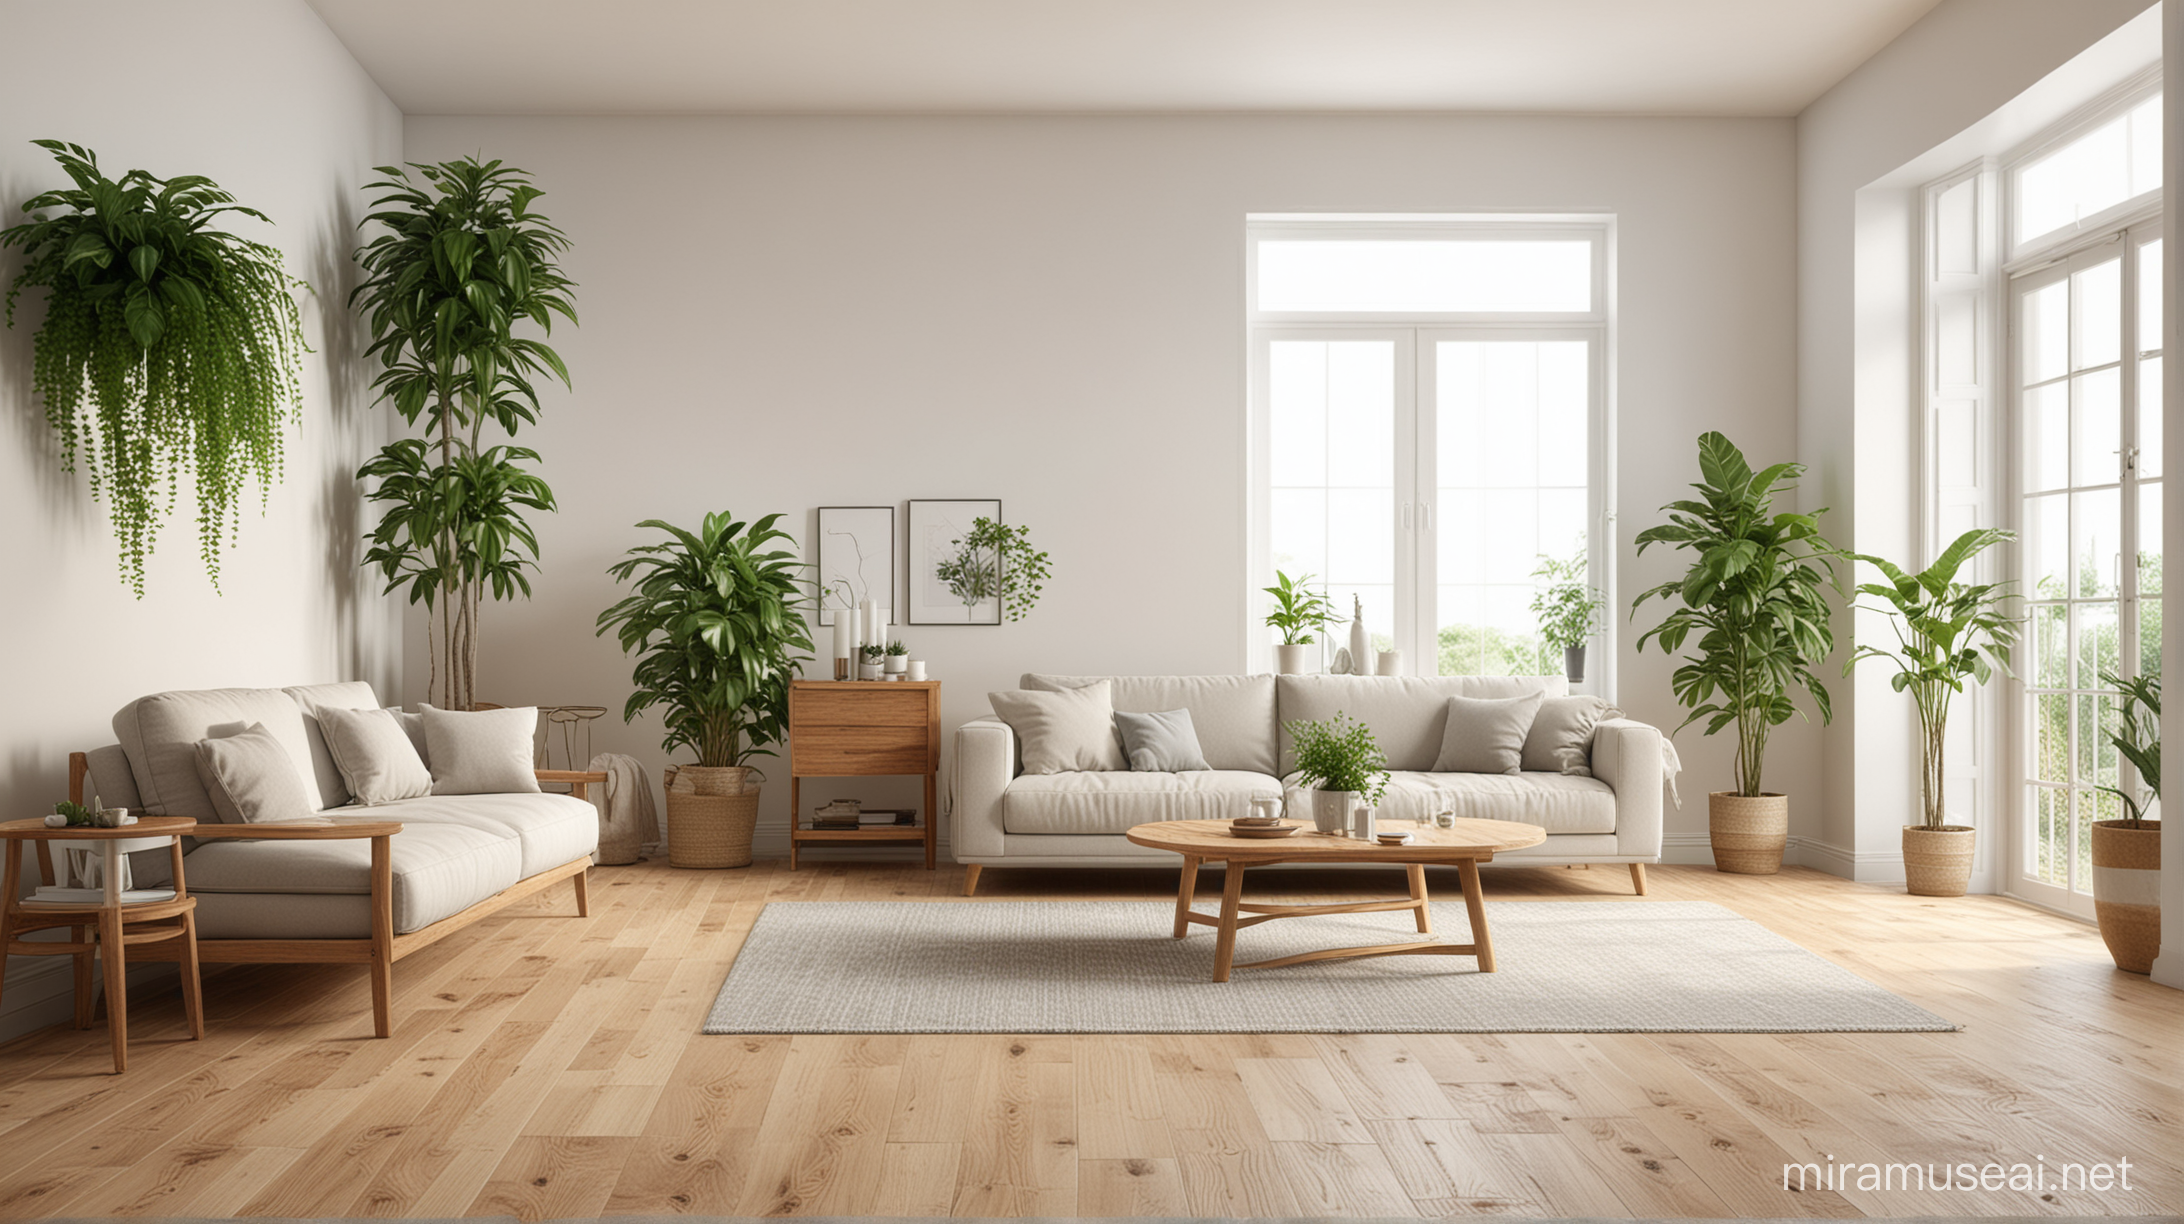 Bright and Natural Living Room with Wooden Flooring and Plants